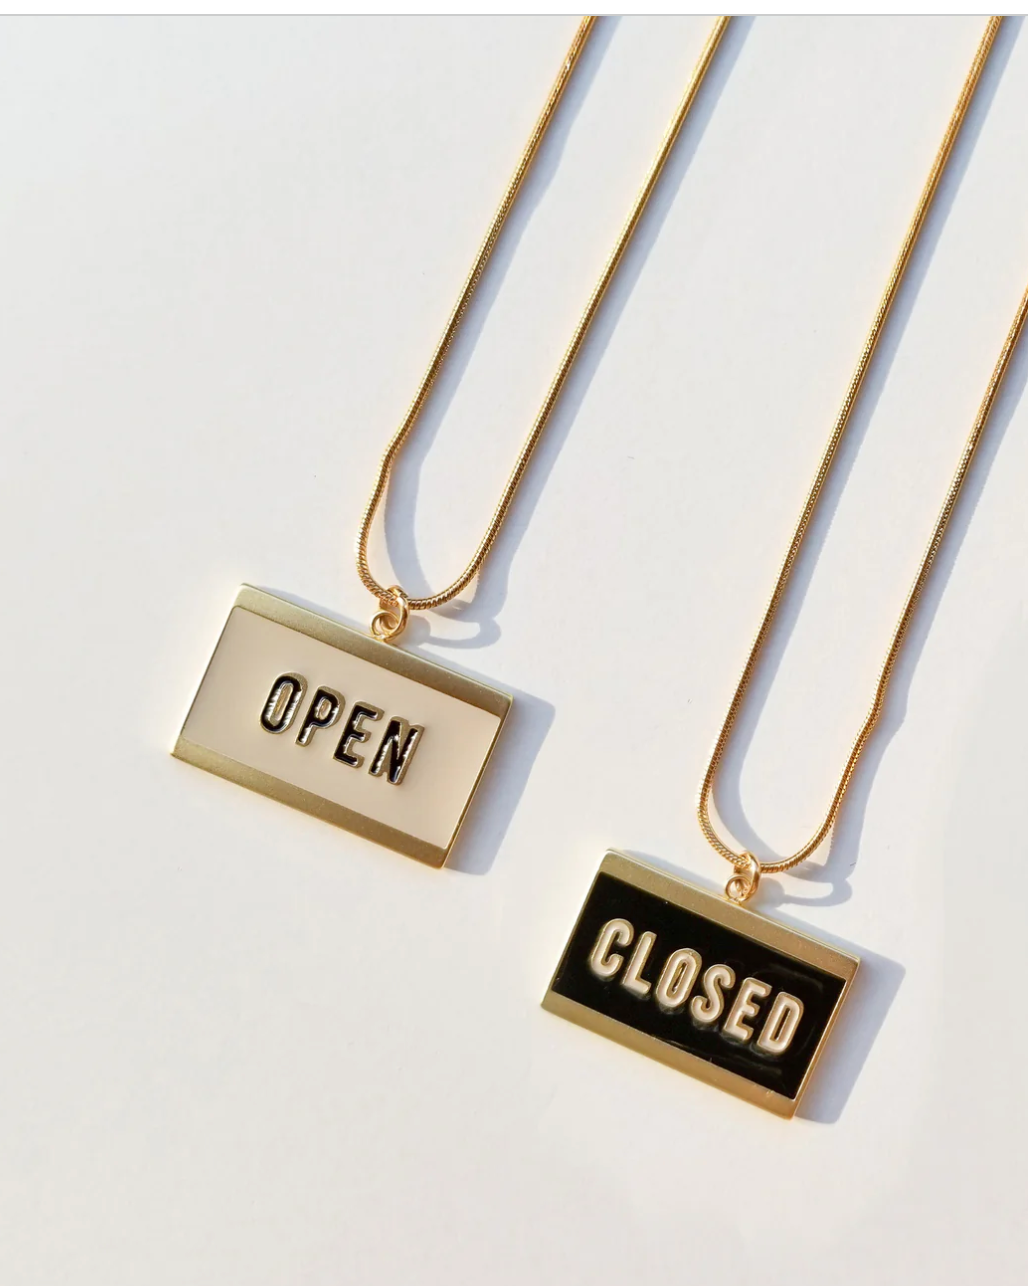 Matter Matters Open & Closed / Reversible Necklace